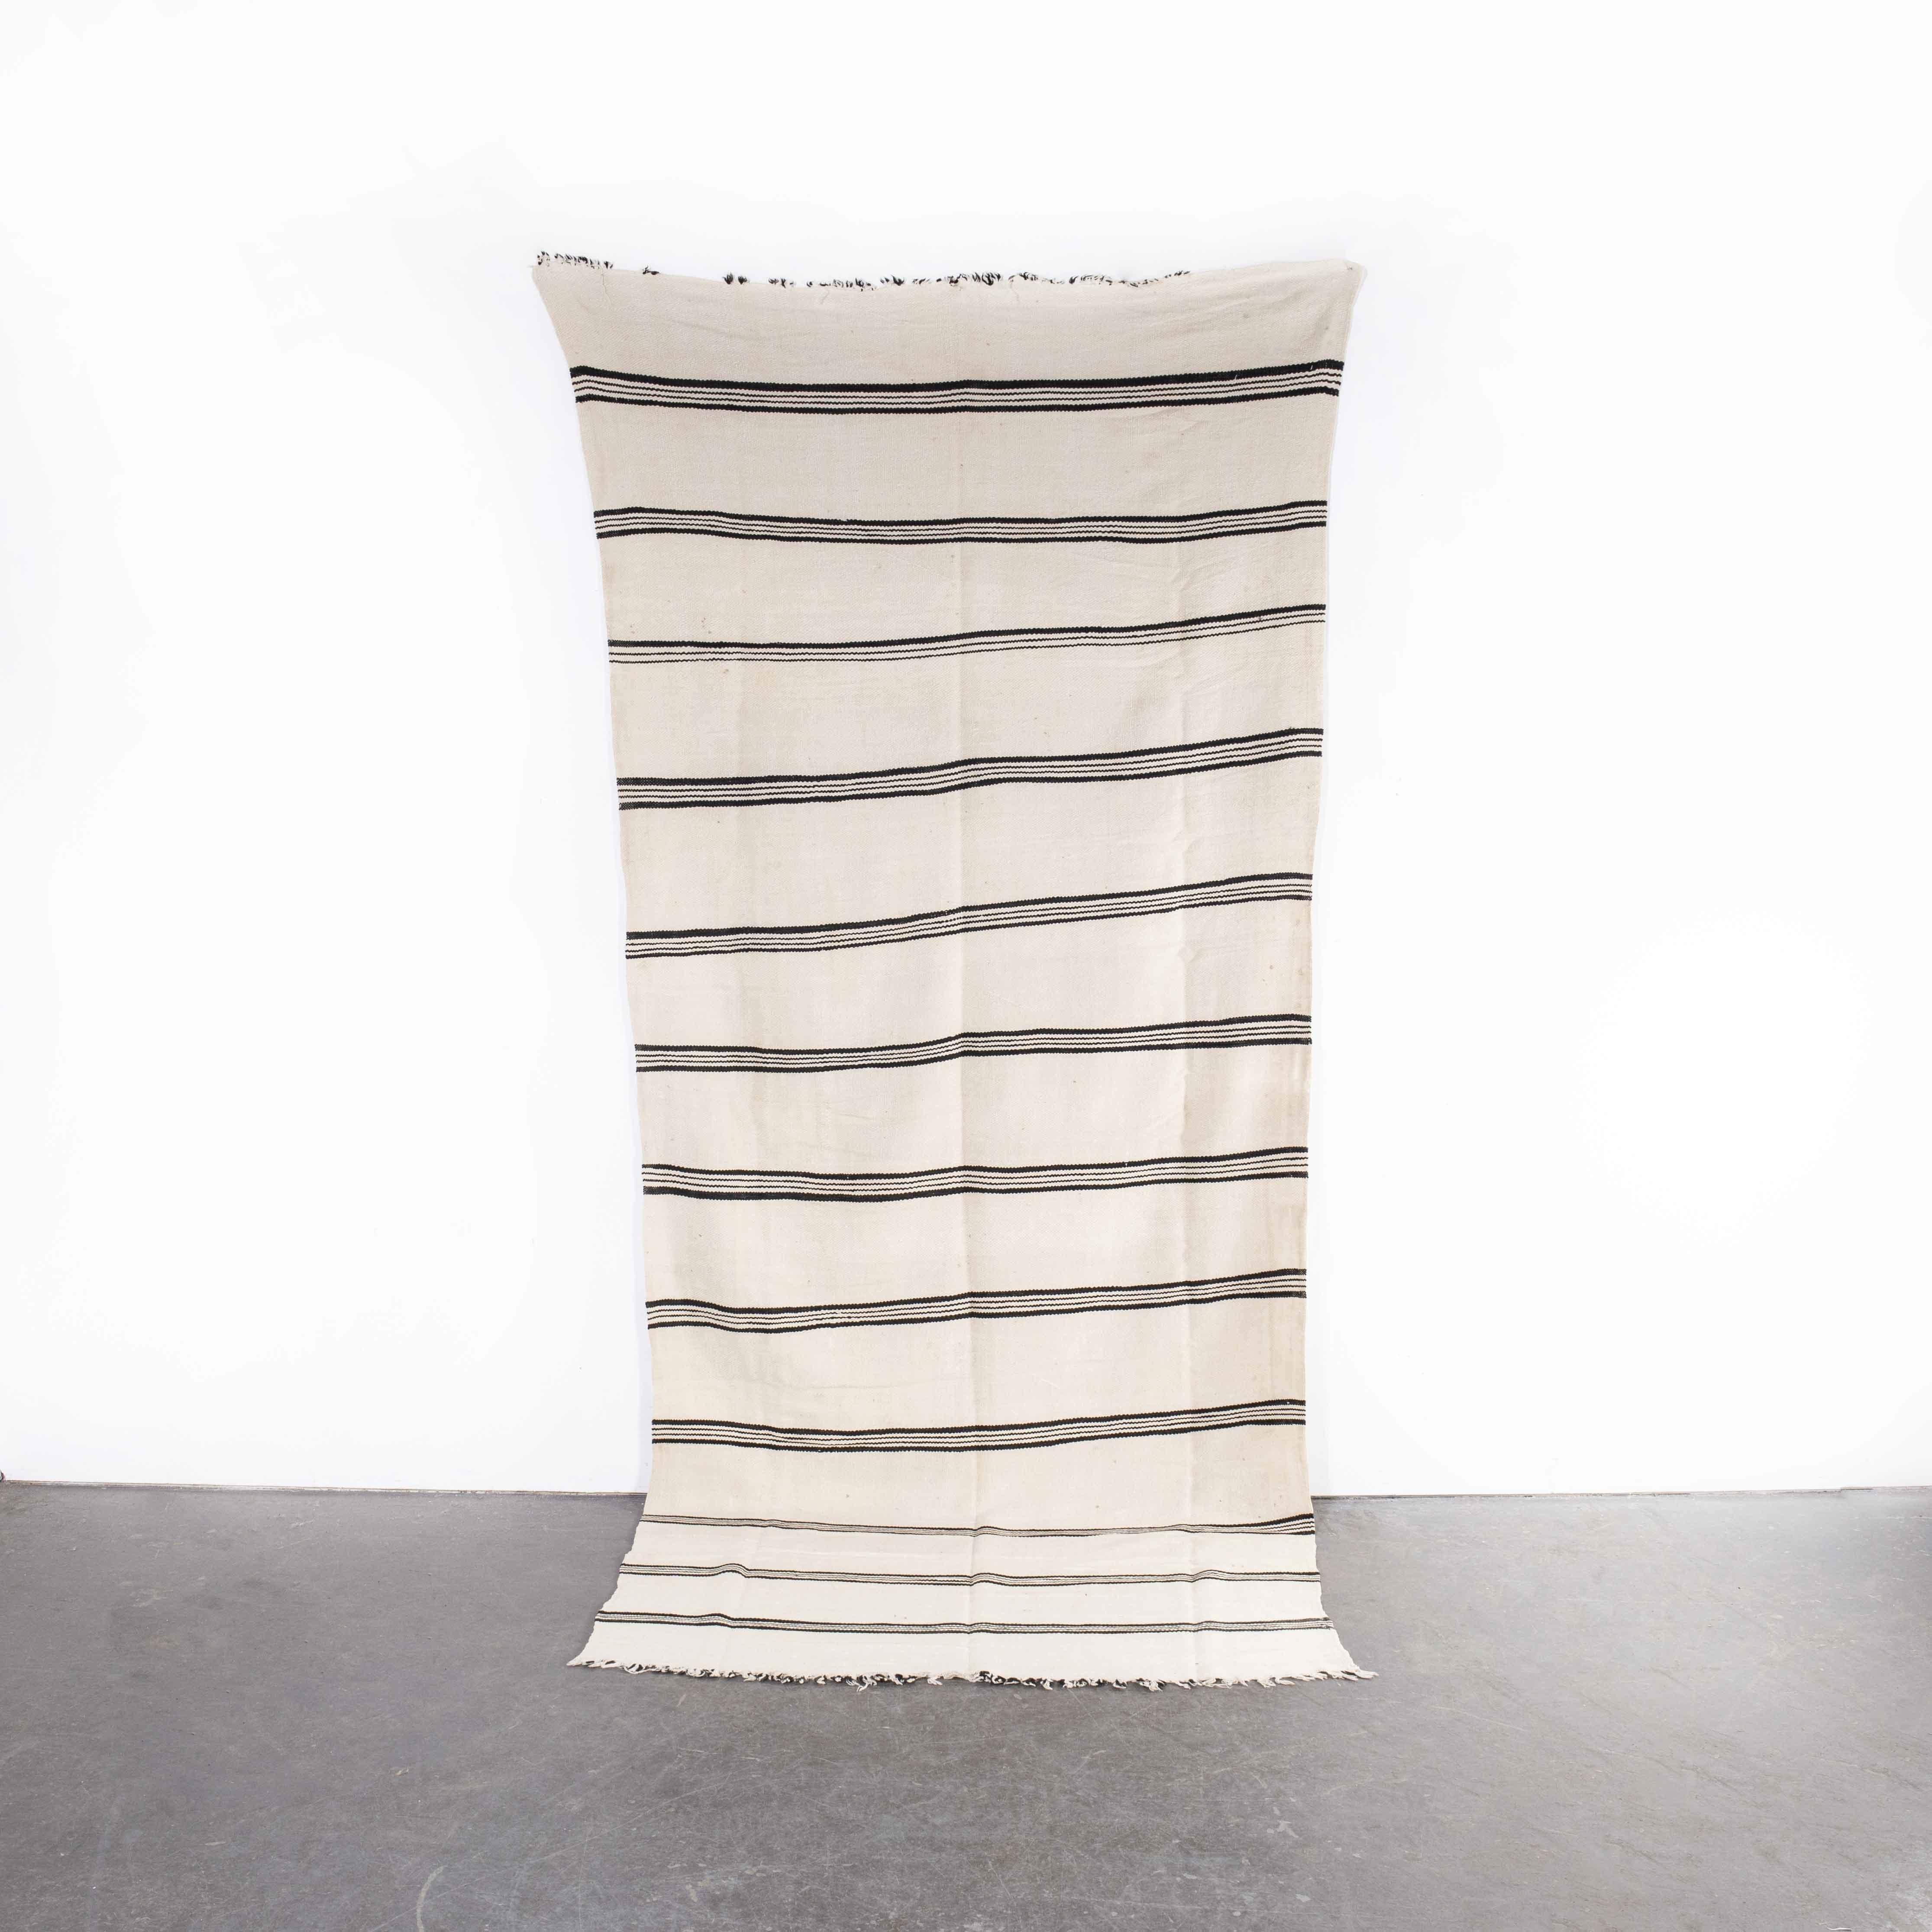 Vintage Berber Bold Monochrome Twin Stripe Hanbel Rug
Vintage Berber Bold Monochrome Twin Stripe Hanbel Rug. These are flat-woven rugs (Hanbel in Arabic) which are light in weight due to the lack of pile. They are often used on floors in hotter